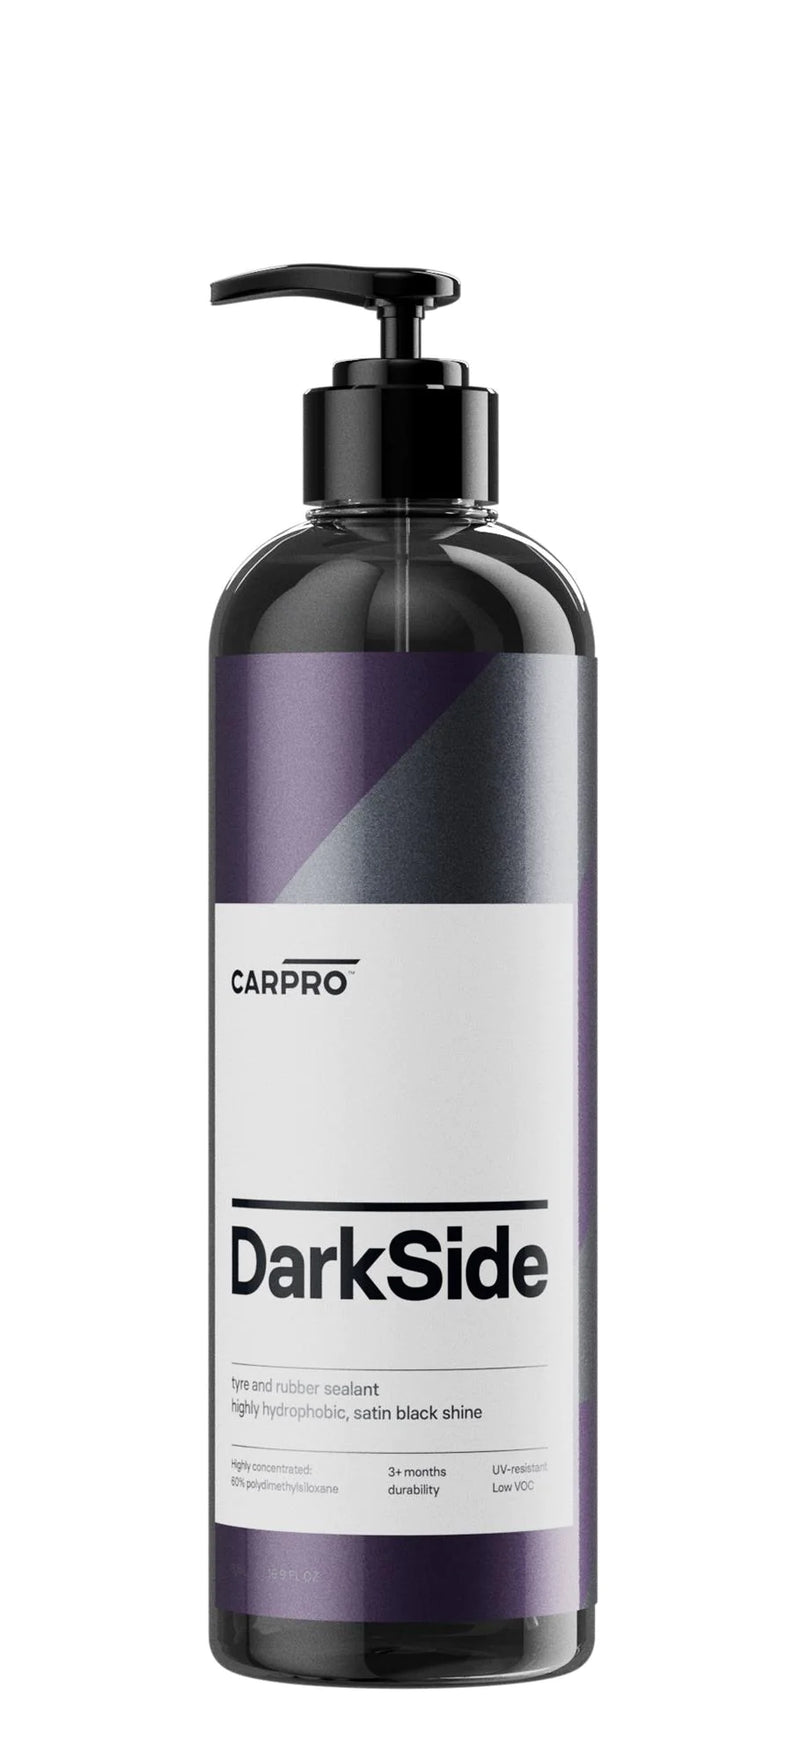 CarPro DarkSide Tyre and Rubber Sealant